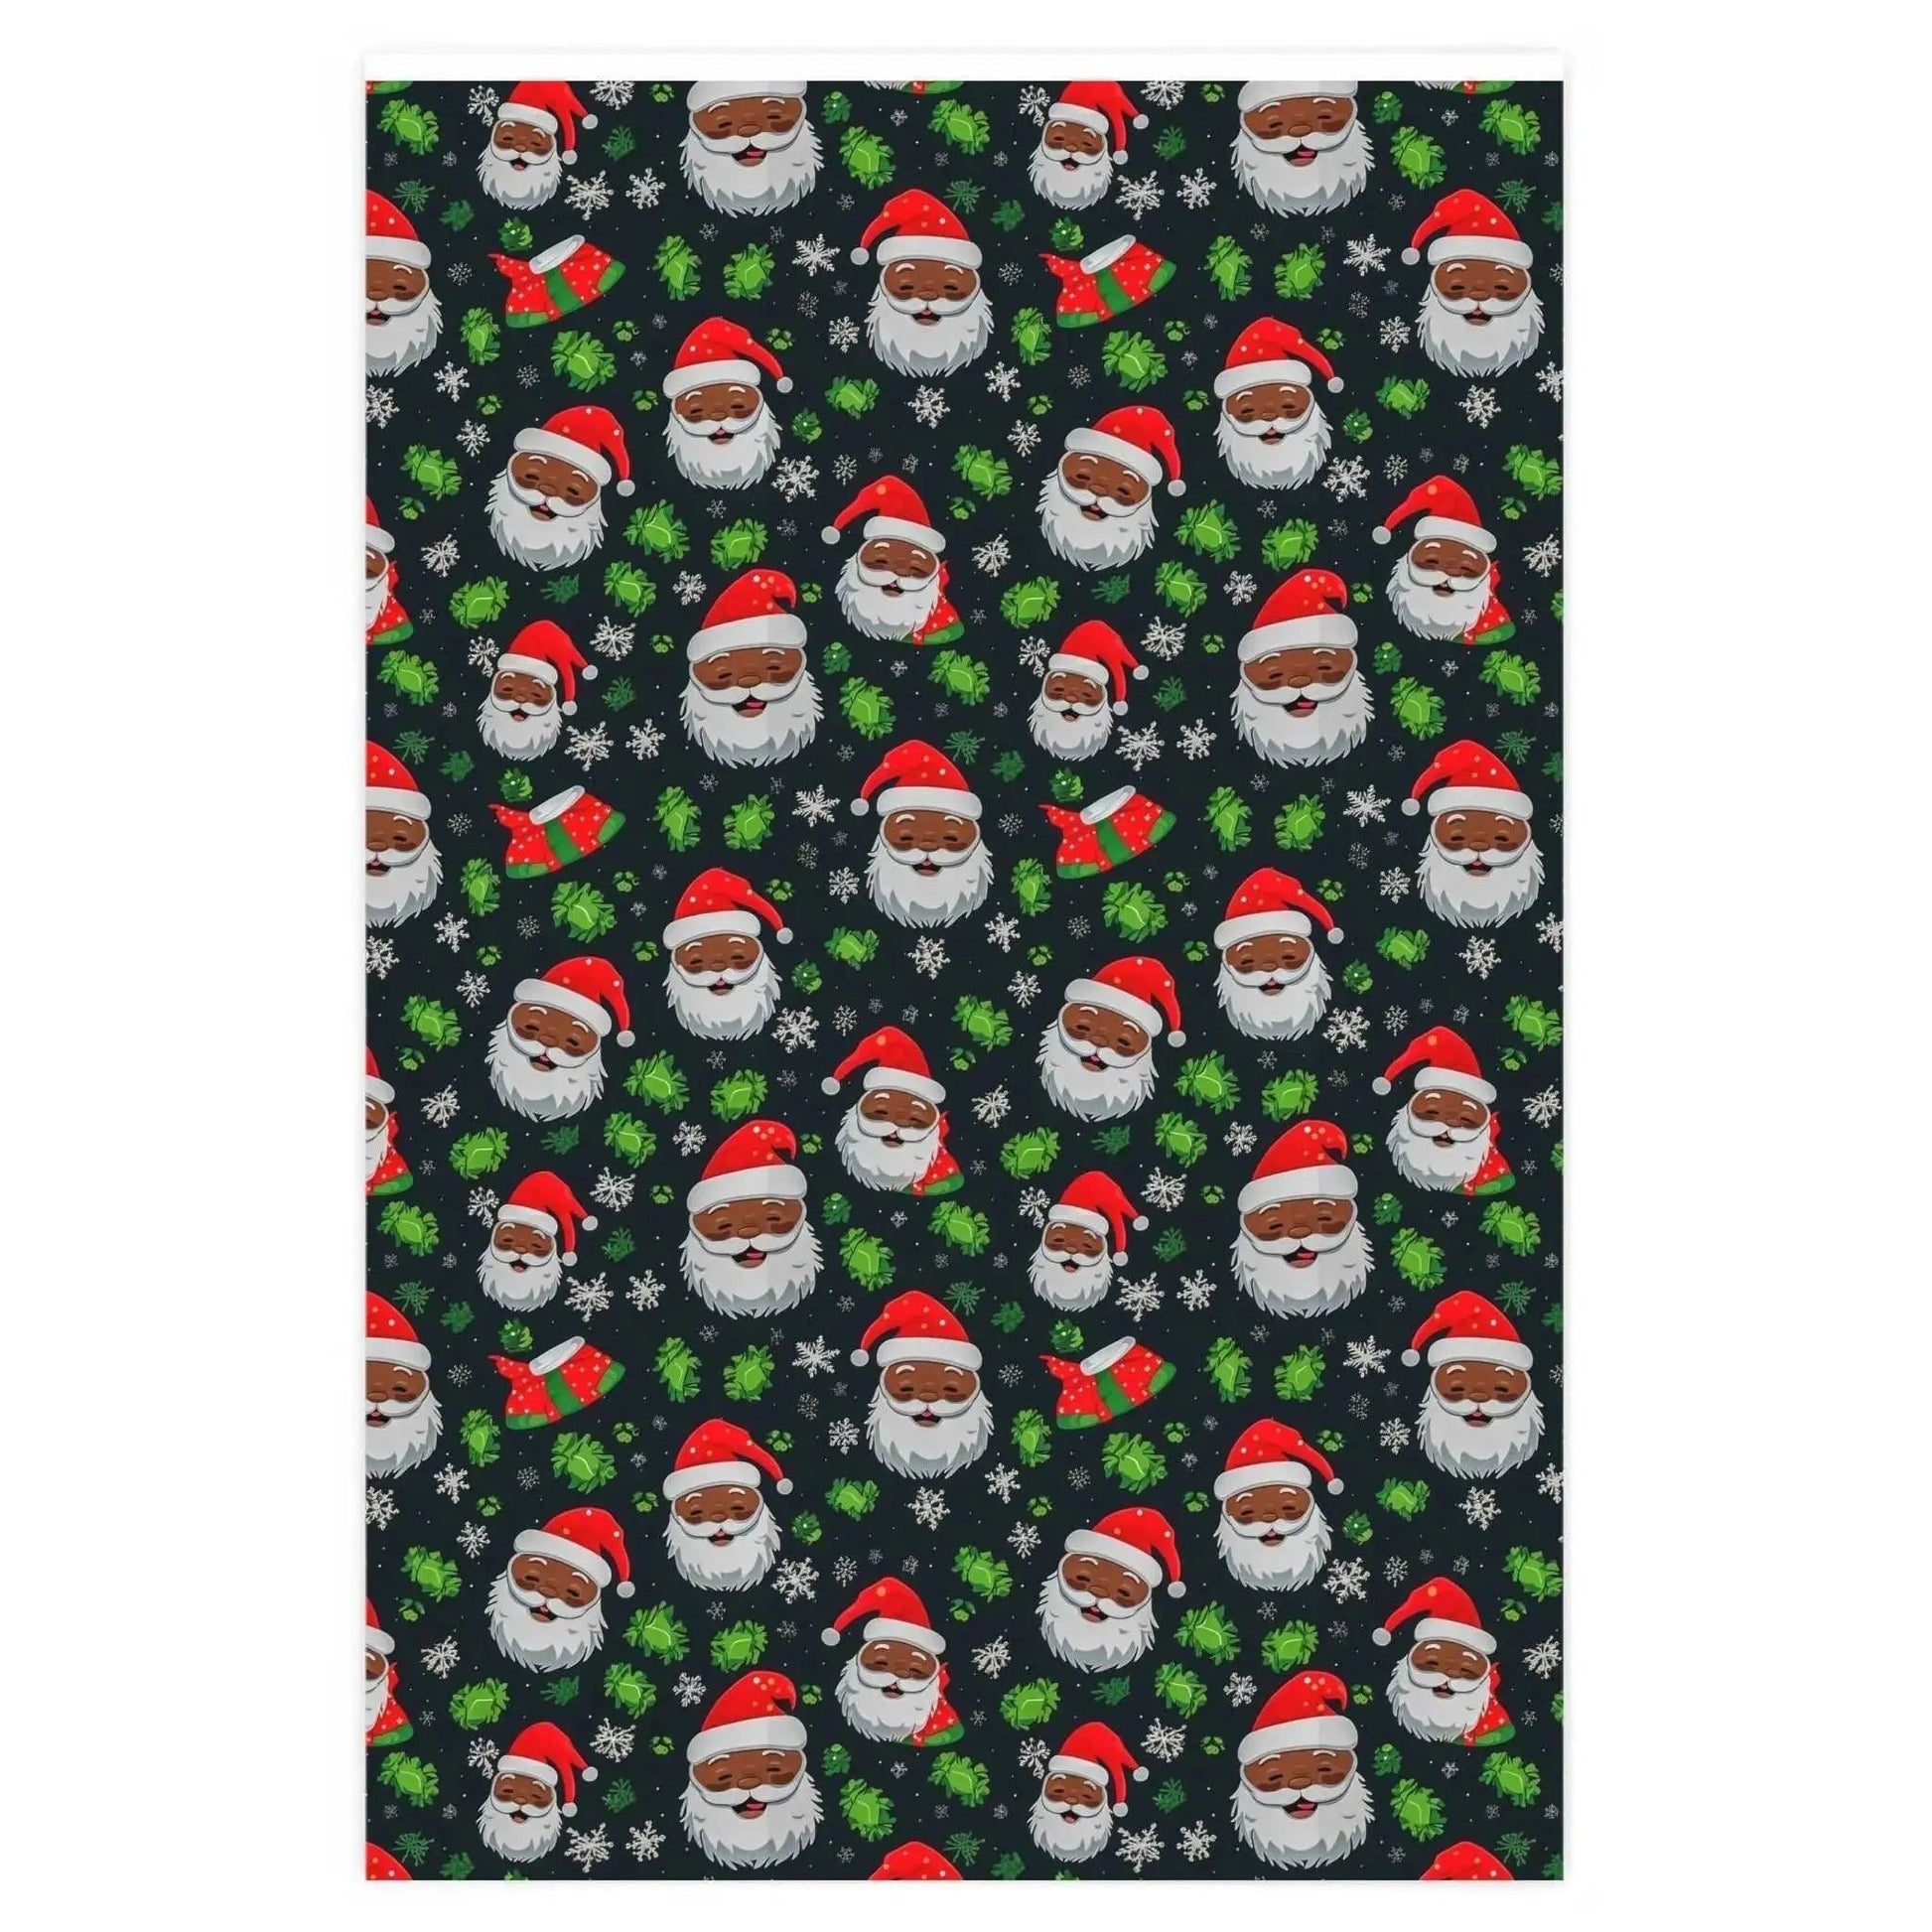 Black Santa Claus Wrapping Paper Rolls